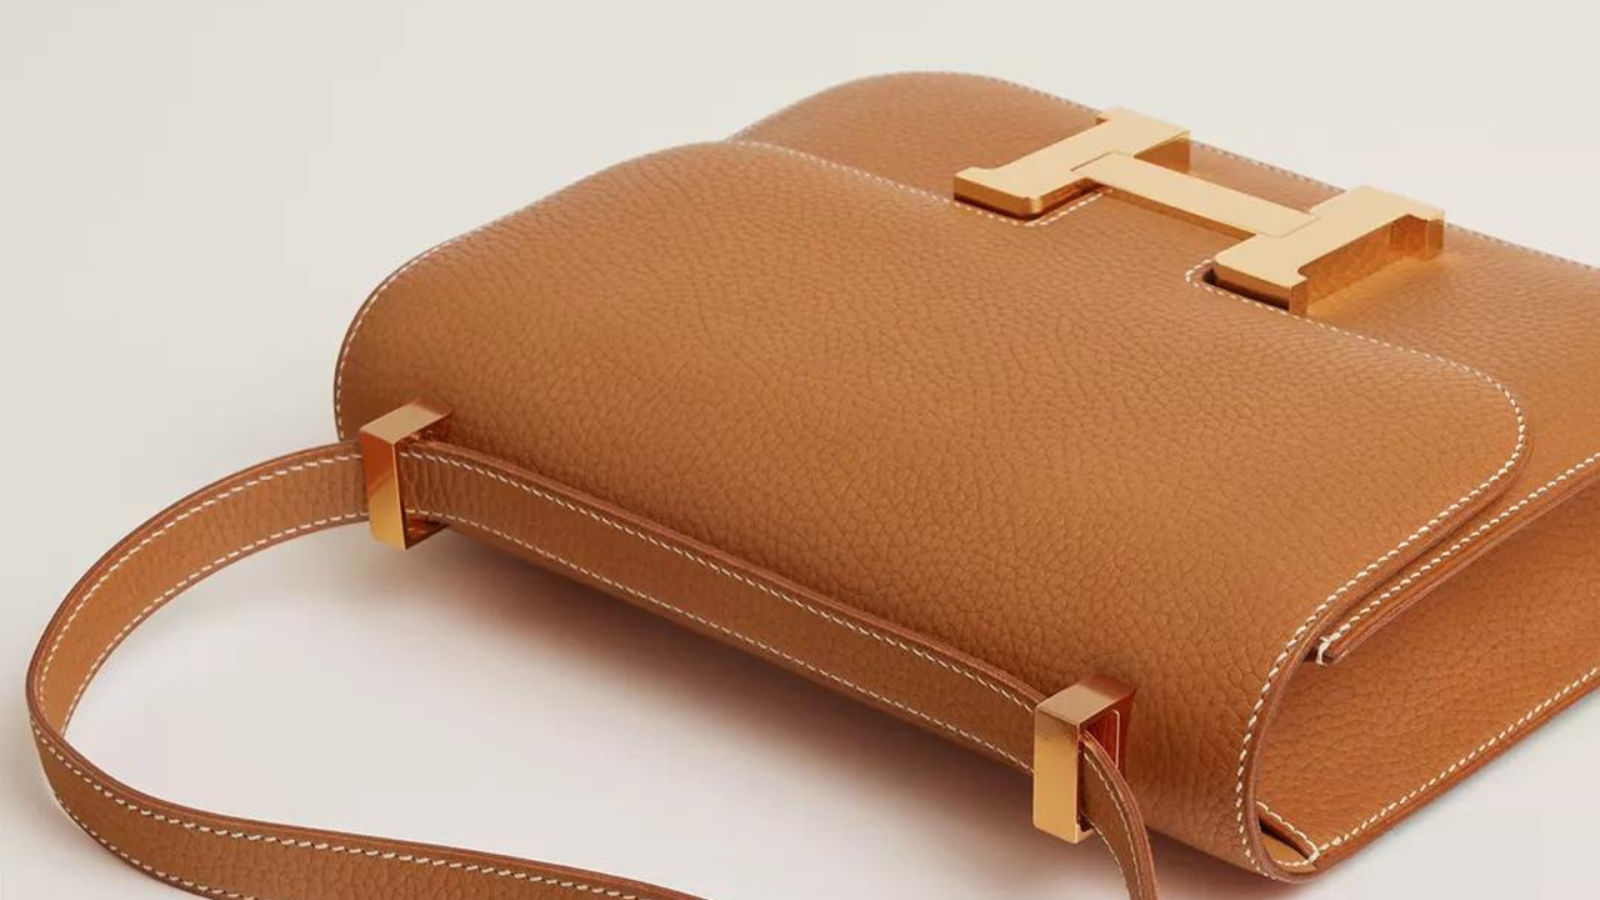 Top designer investment bags that actually increase in value